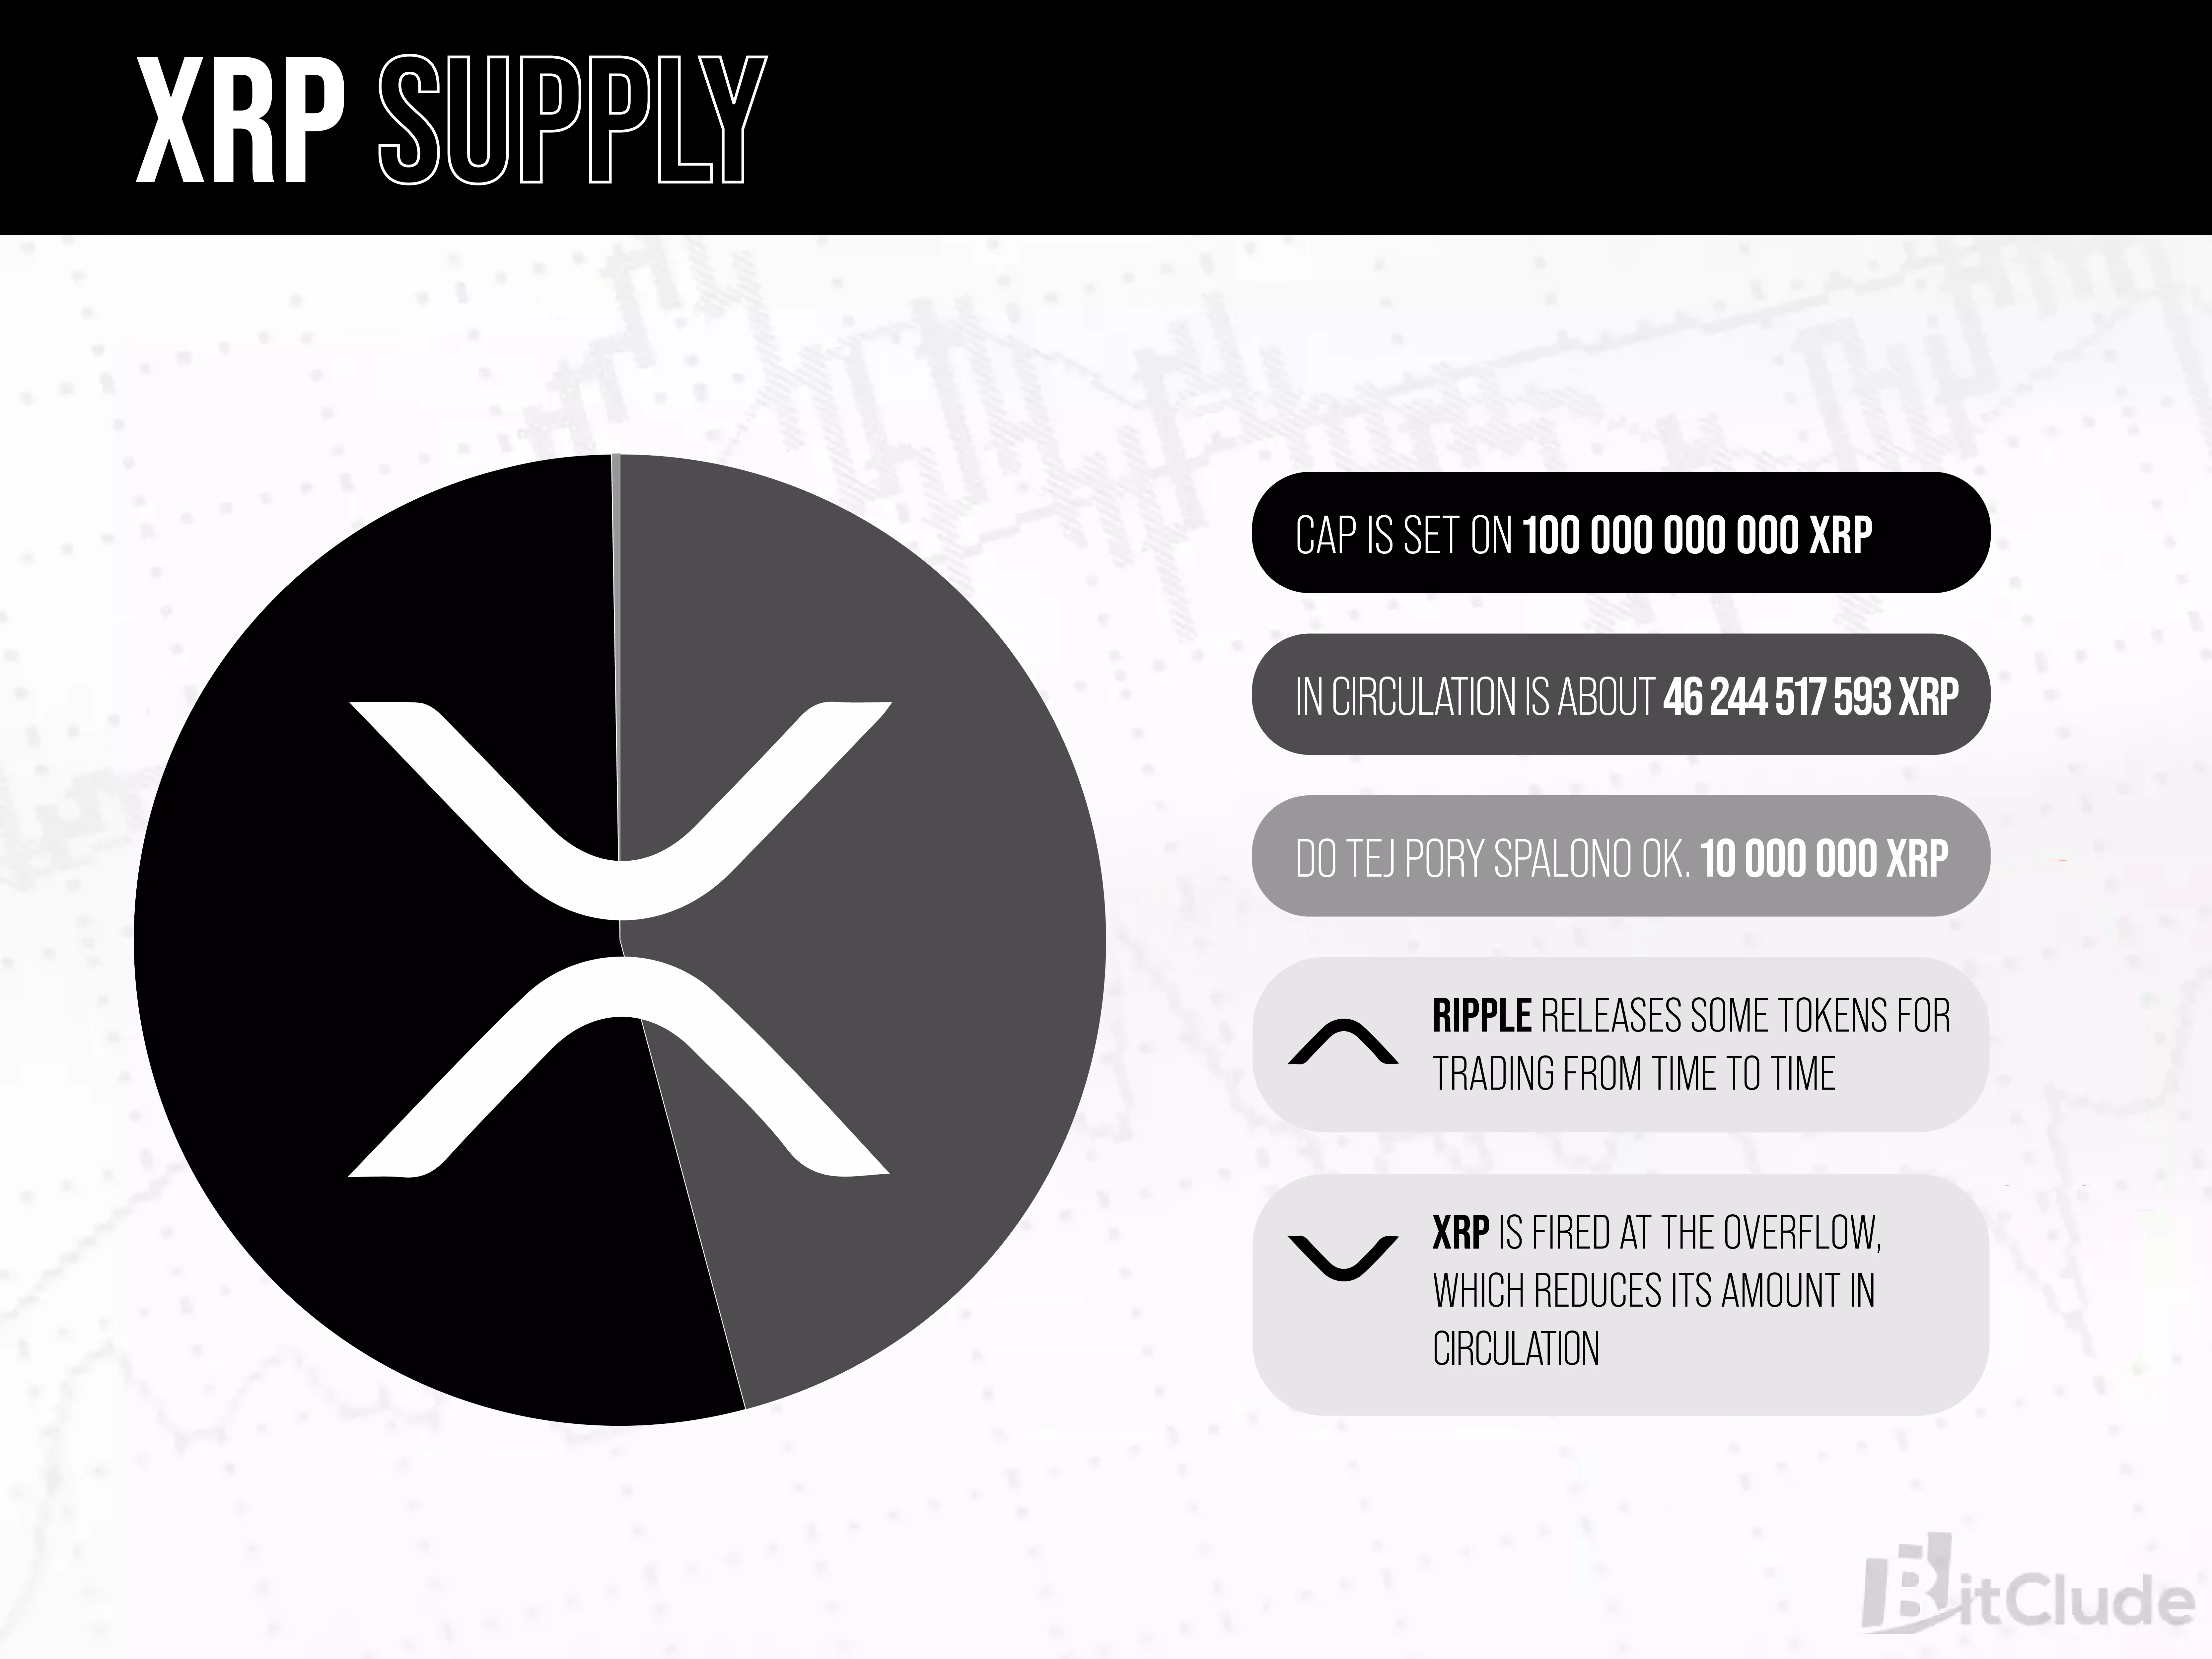 XRP Supply - the supply limit has been set at 100,000,000,000 XRP.